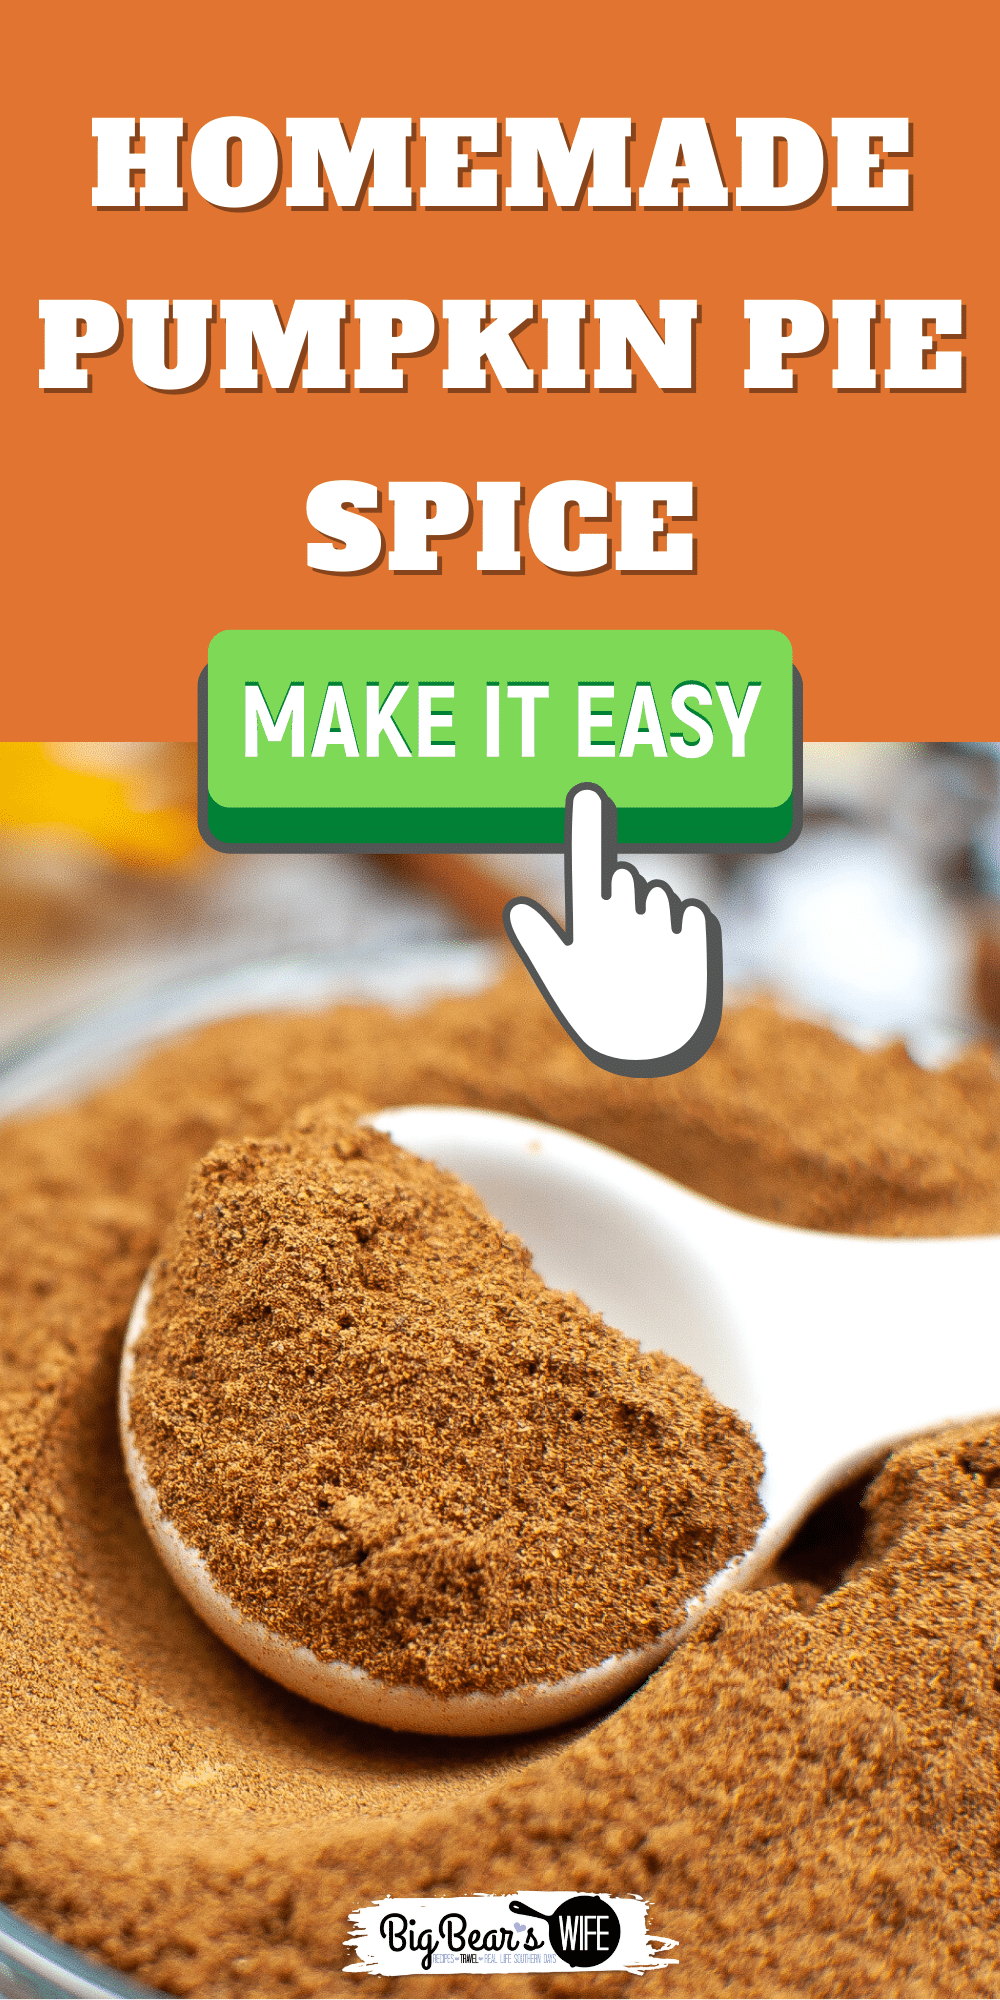 Ginger, Allspice, Cinnamon, Cloves and Nutmeg are whisked together to create a homemade pumpkin pie spice that is perfect for baking and smells amazing!  via @bigbearswife